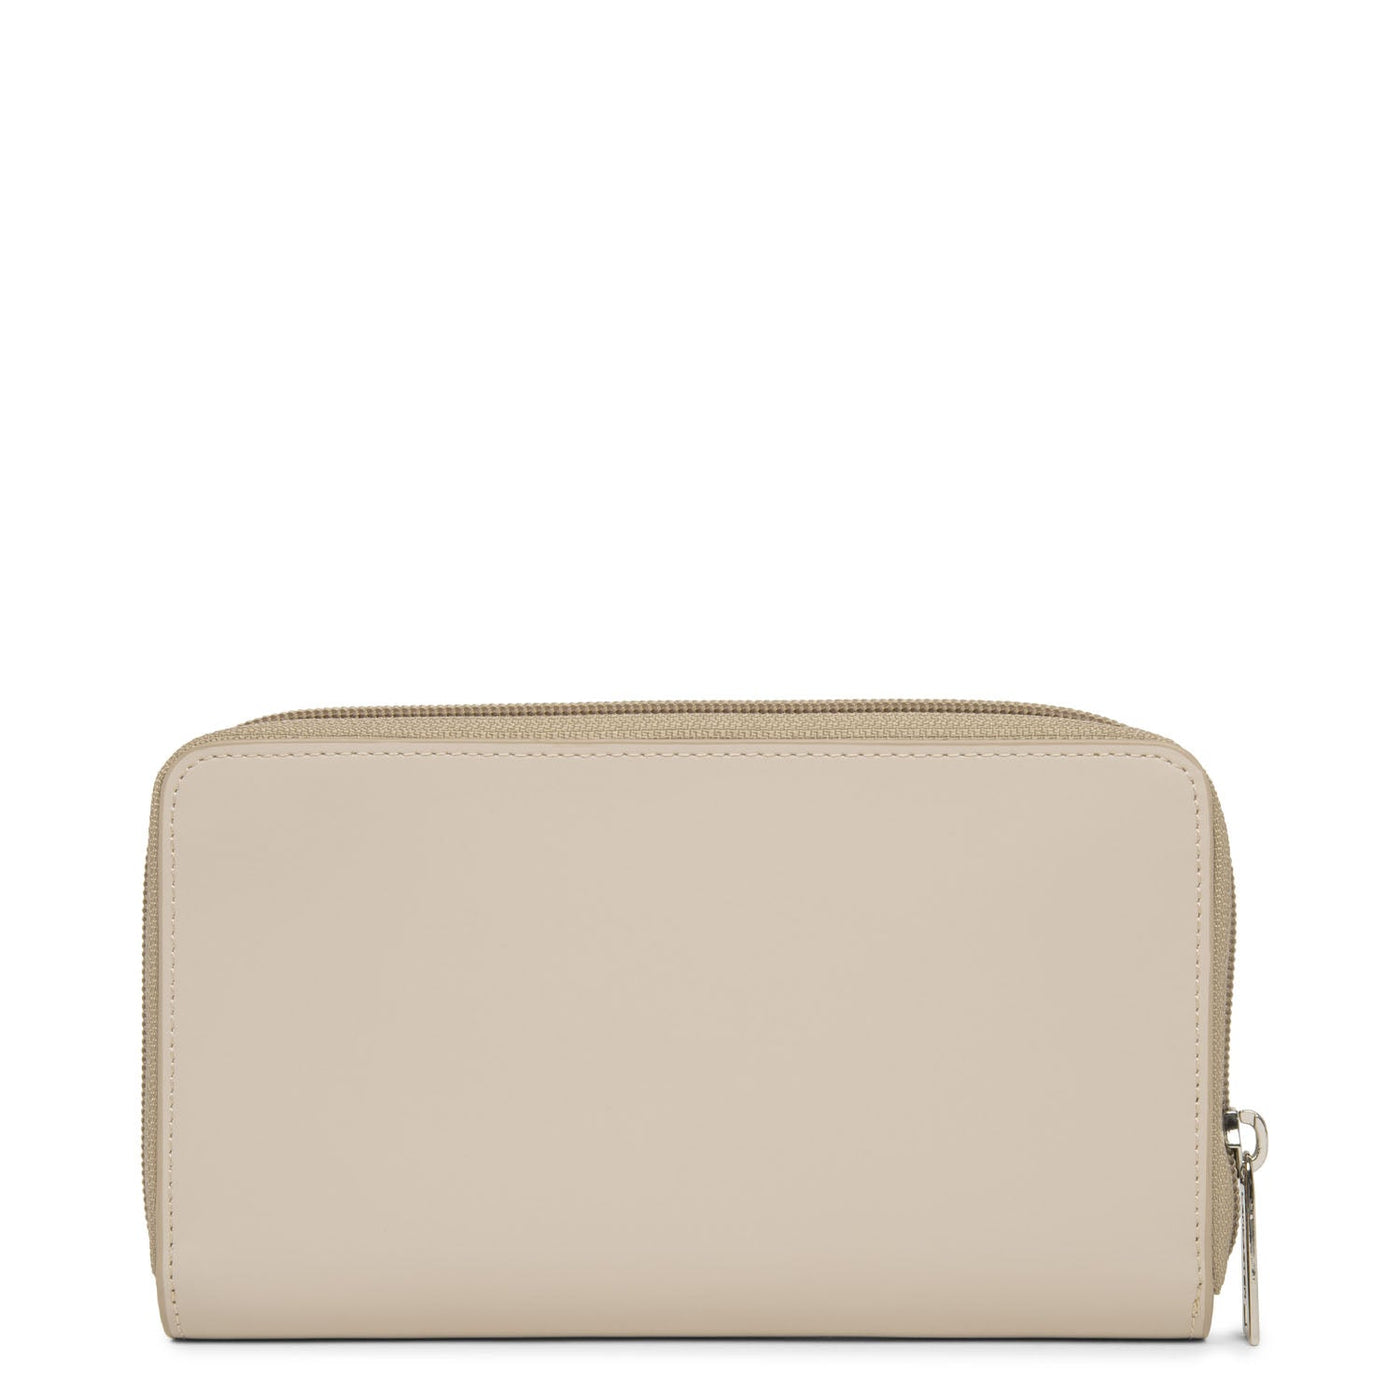 back to back organizer wallet - smooth #couleur_galet-ros-cru-nude